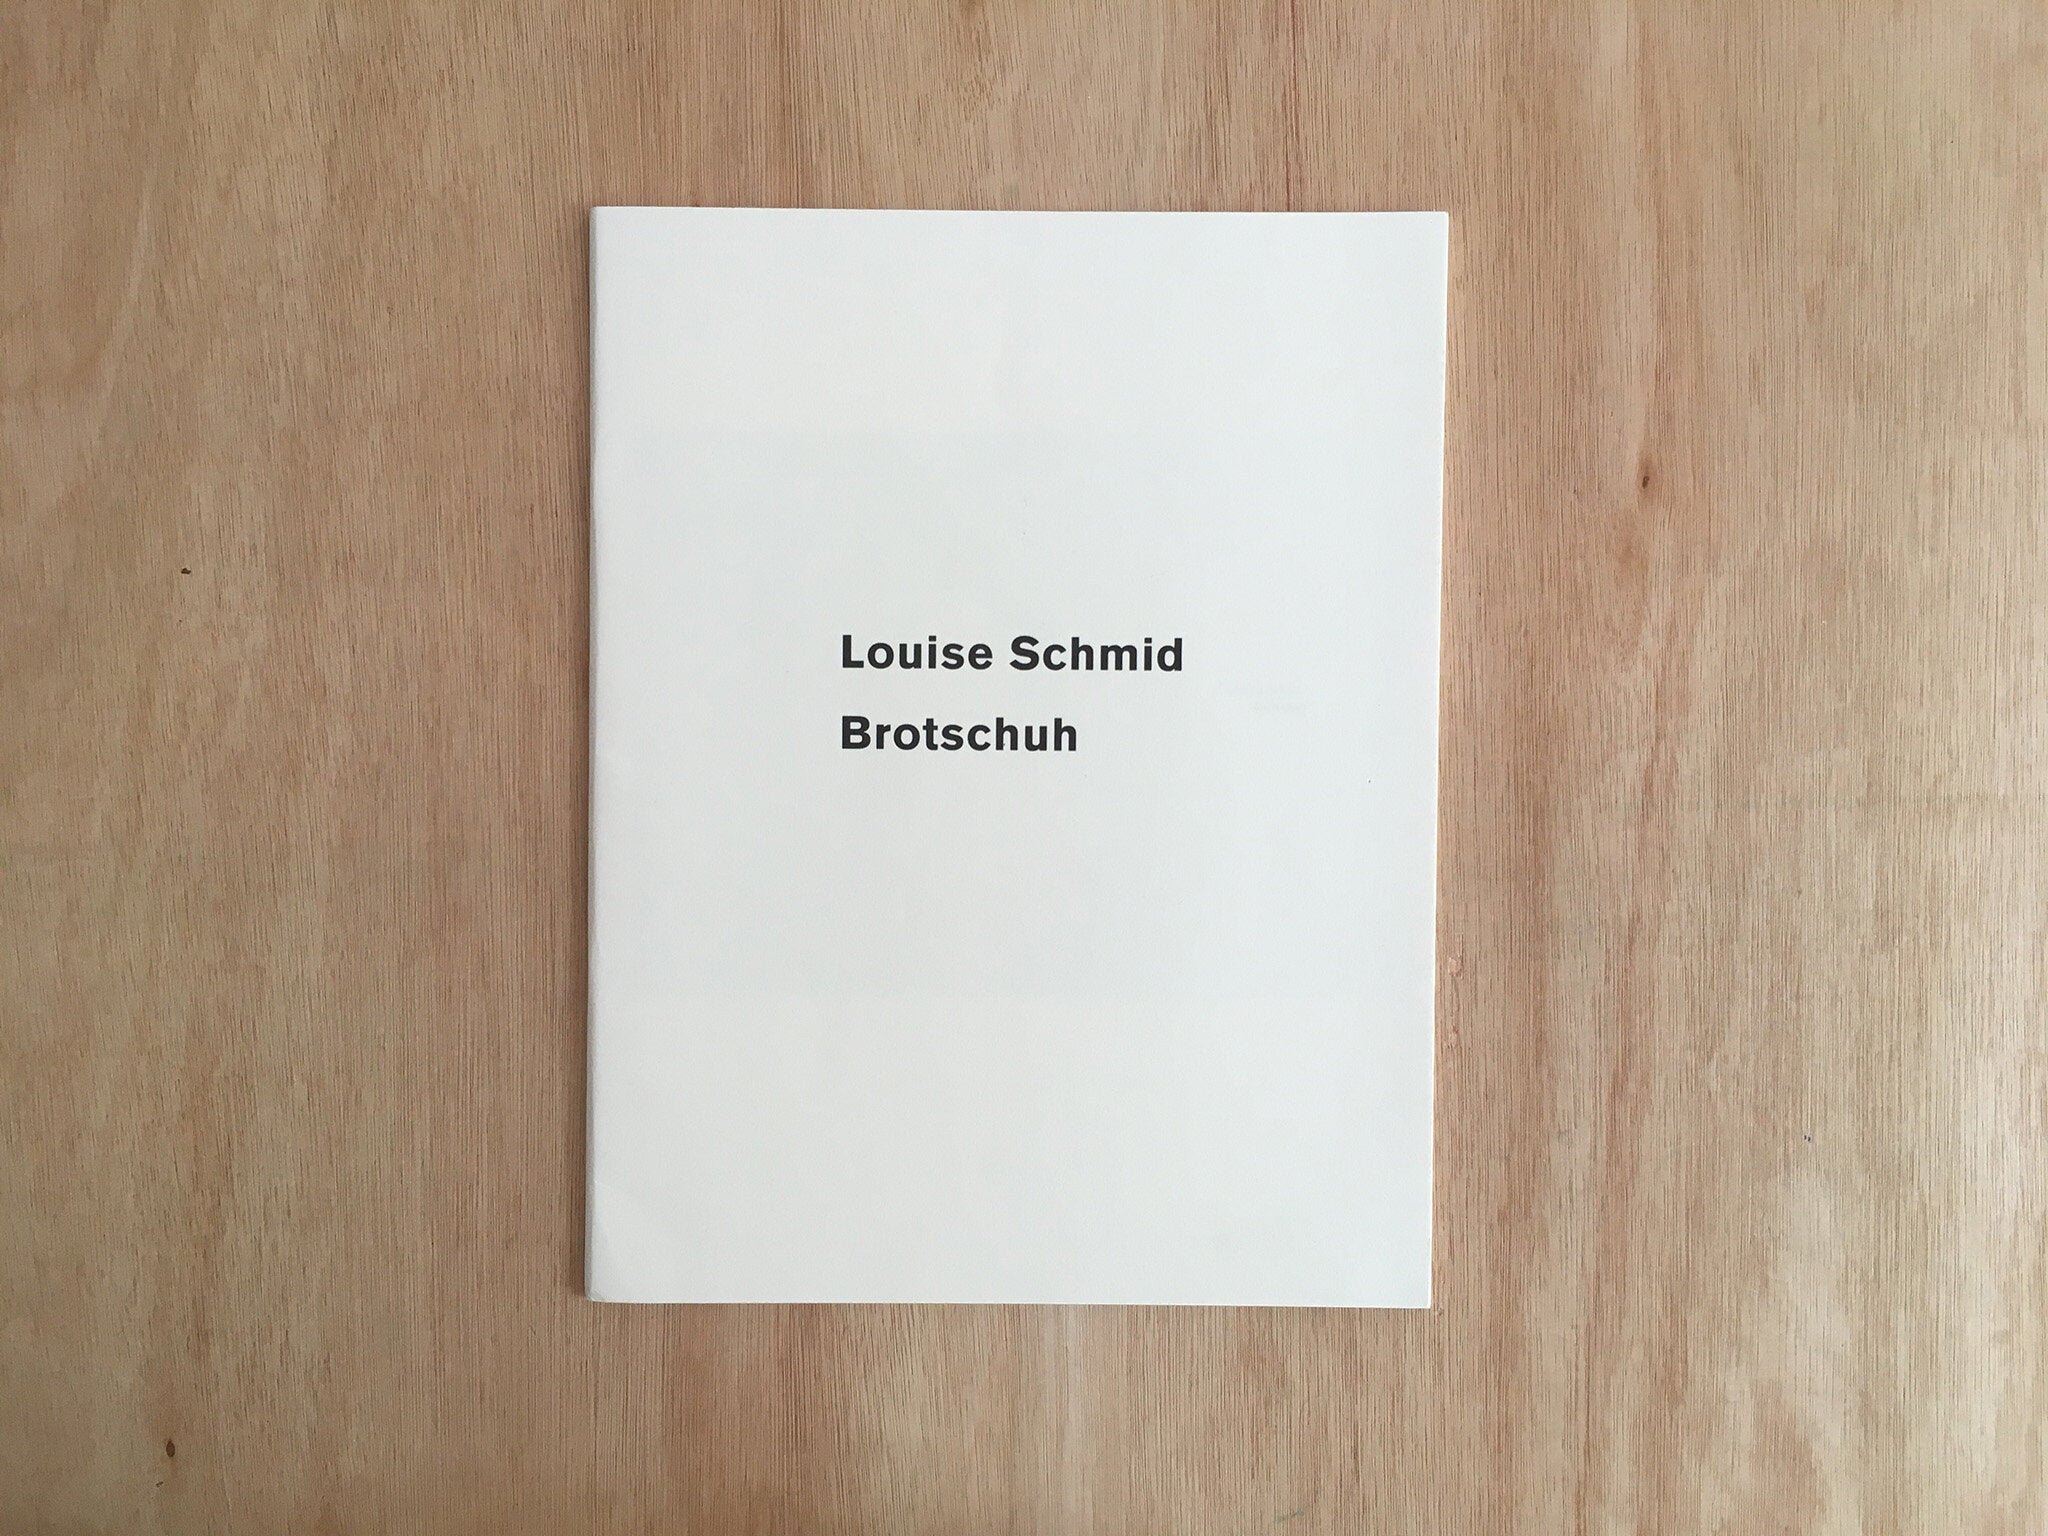 BROTSCHUH by Louise Schmid